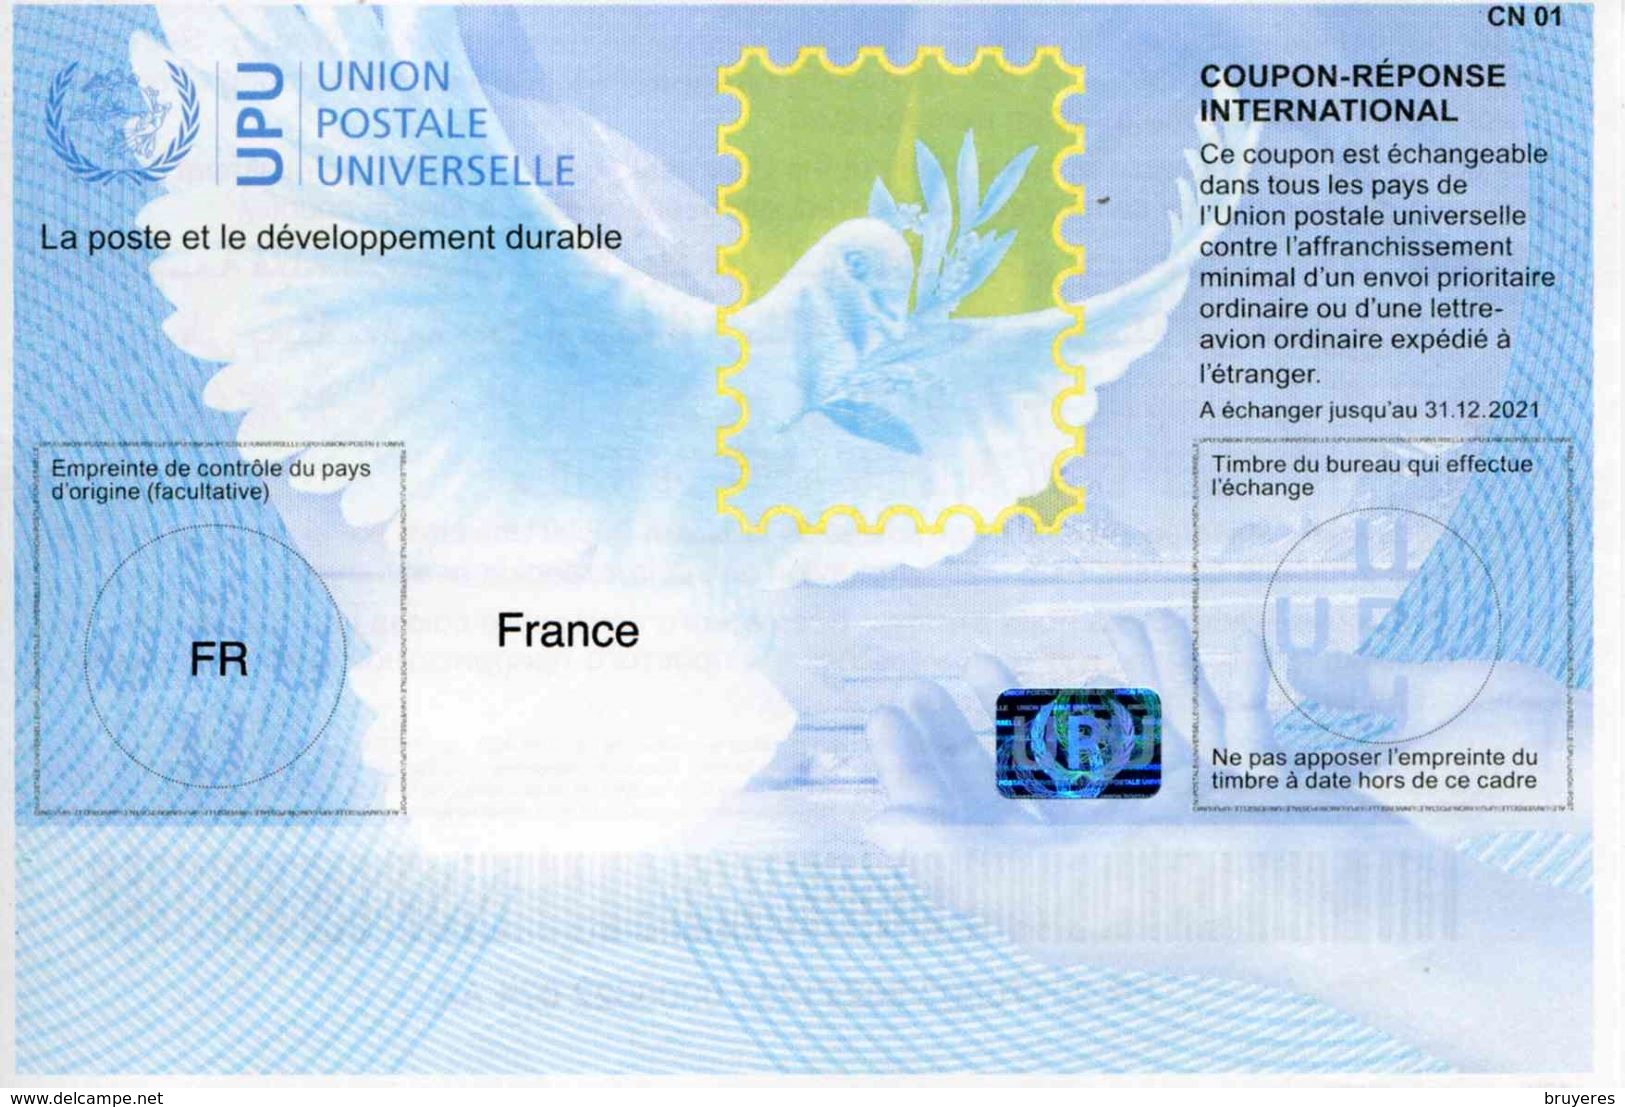 COUPON-REPONSE INTERNATIONAL (F) - CN 01 - Validité 31.12.2021 - Antwoordbons